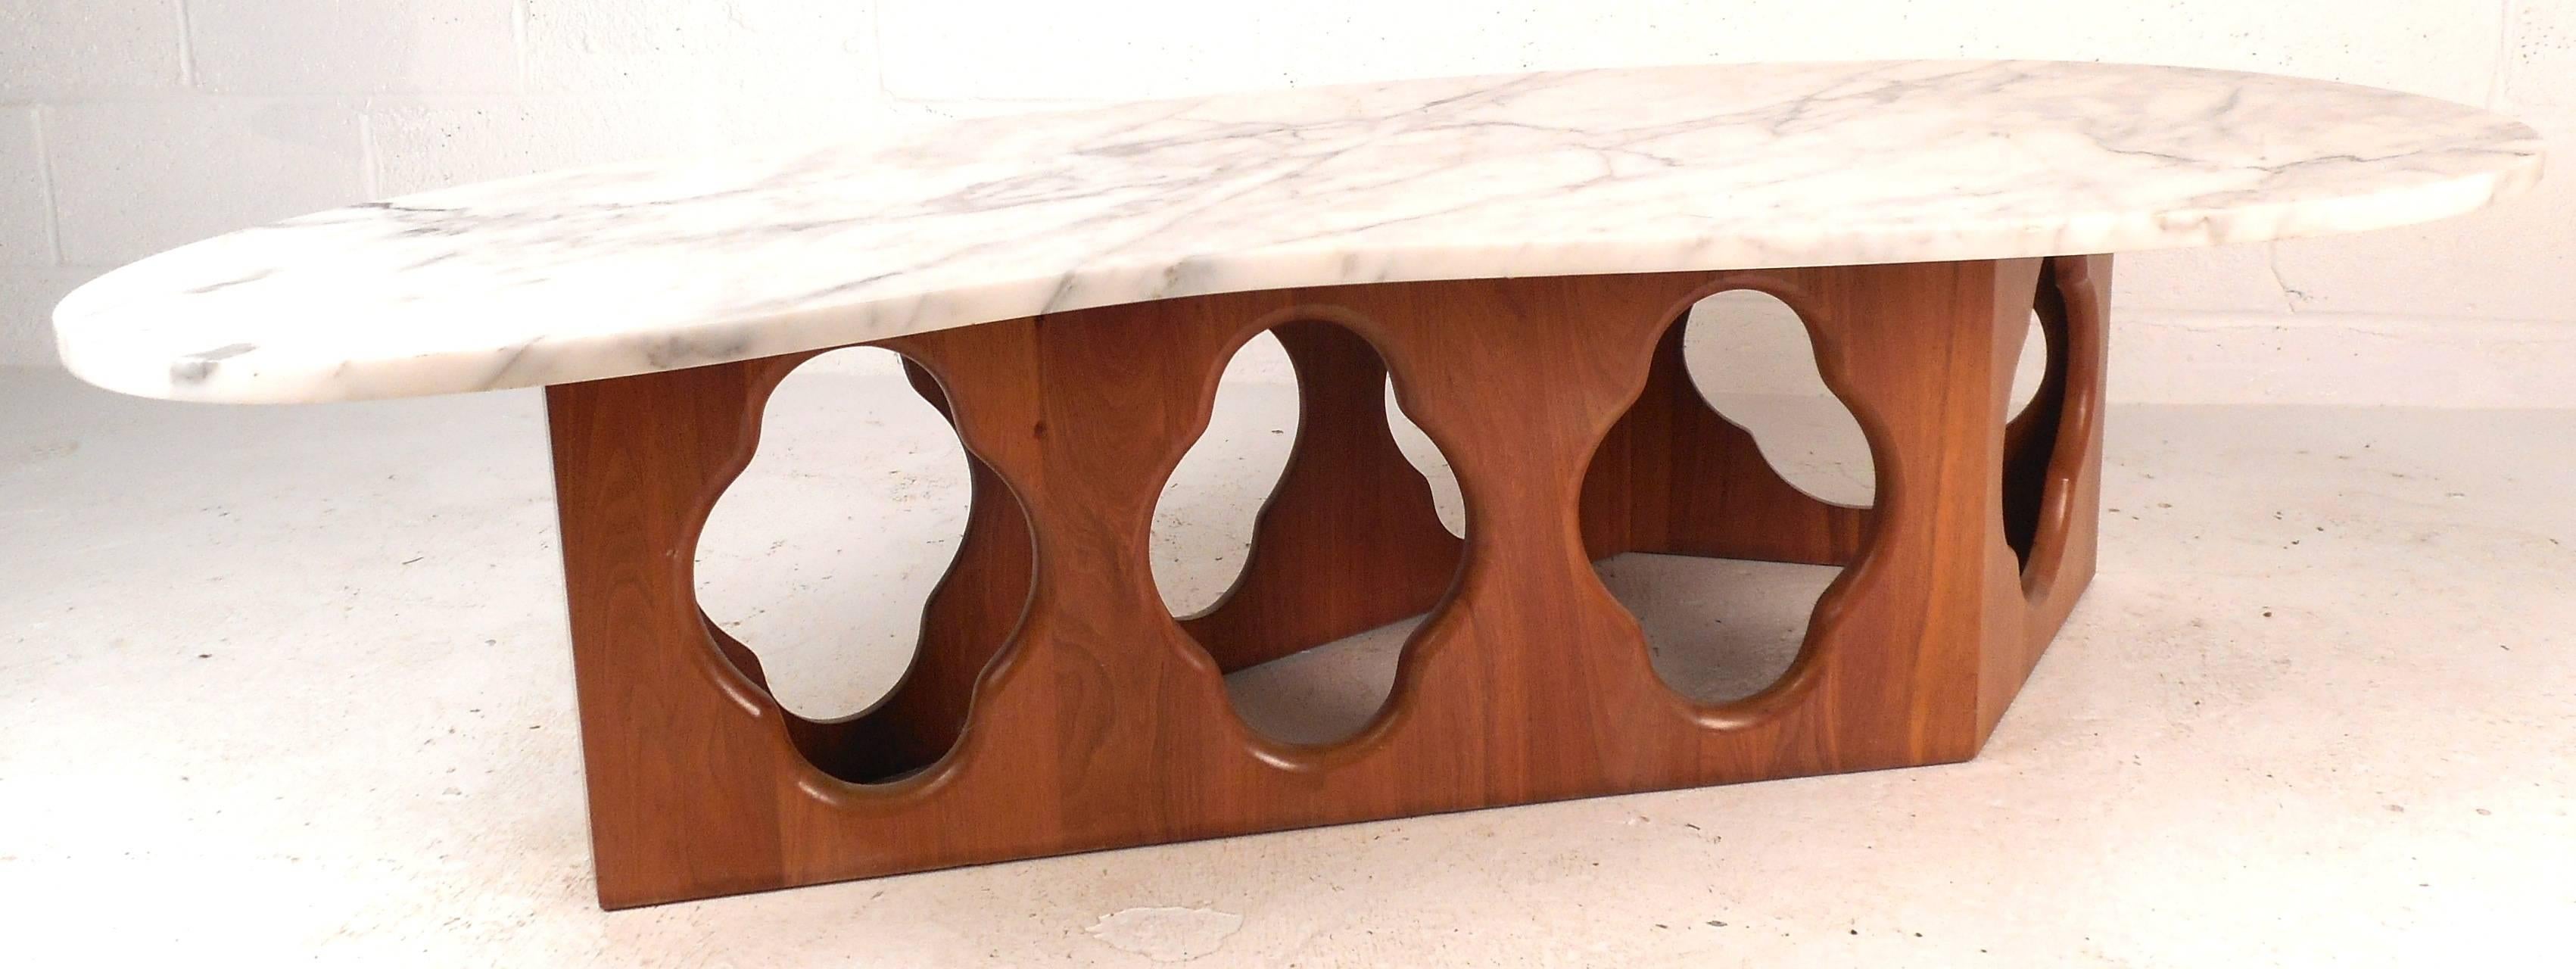 This beautiful vintage Modern kidney shaped coffee table features a sculpted teak wood base with intricate cut out designs and stylish white marble top. The unique shape of the base makes it an impressive addition to any modern interior. Please